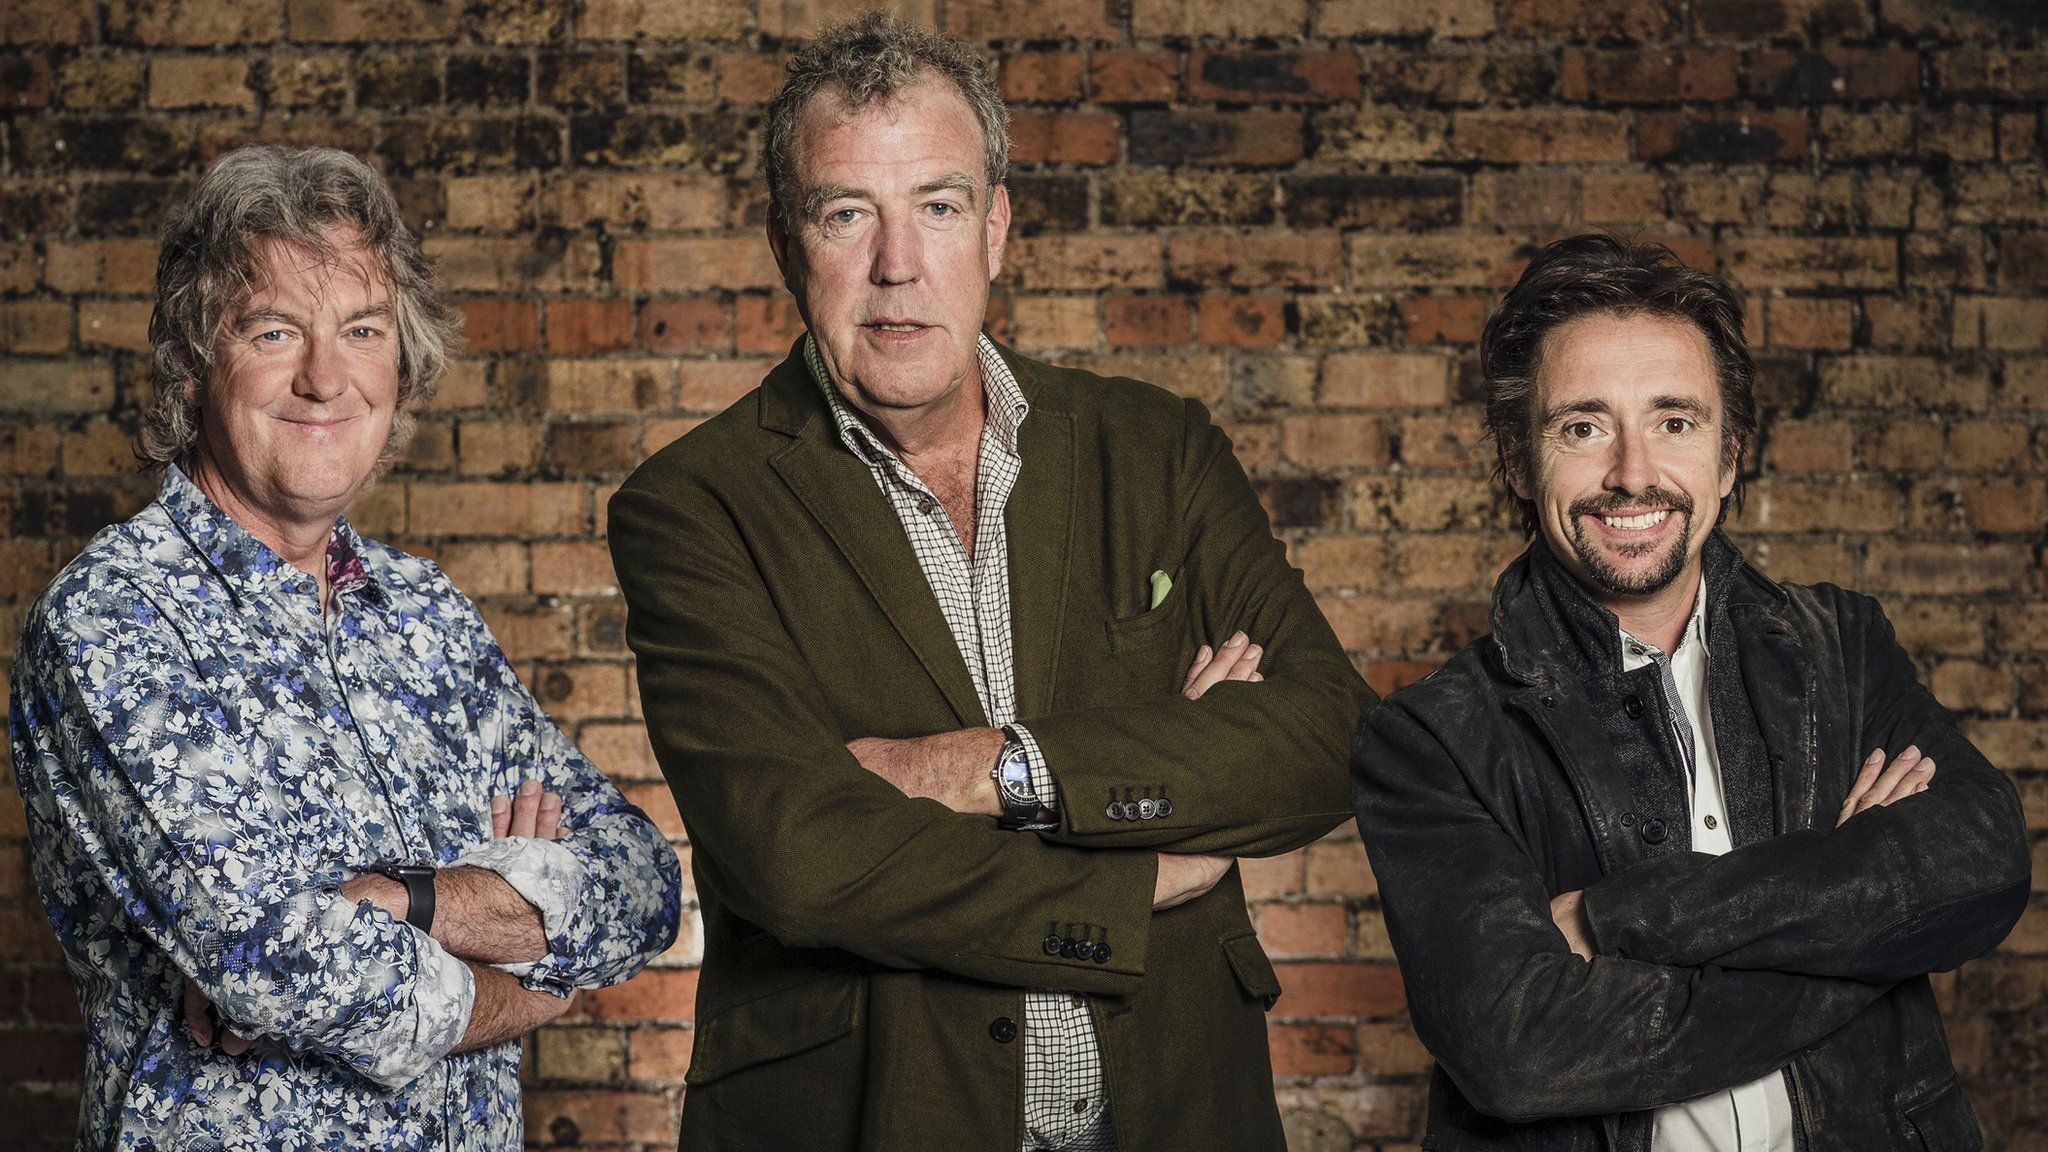 The Grand Tour: Jeremy Clarkson's first show since Top Gear